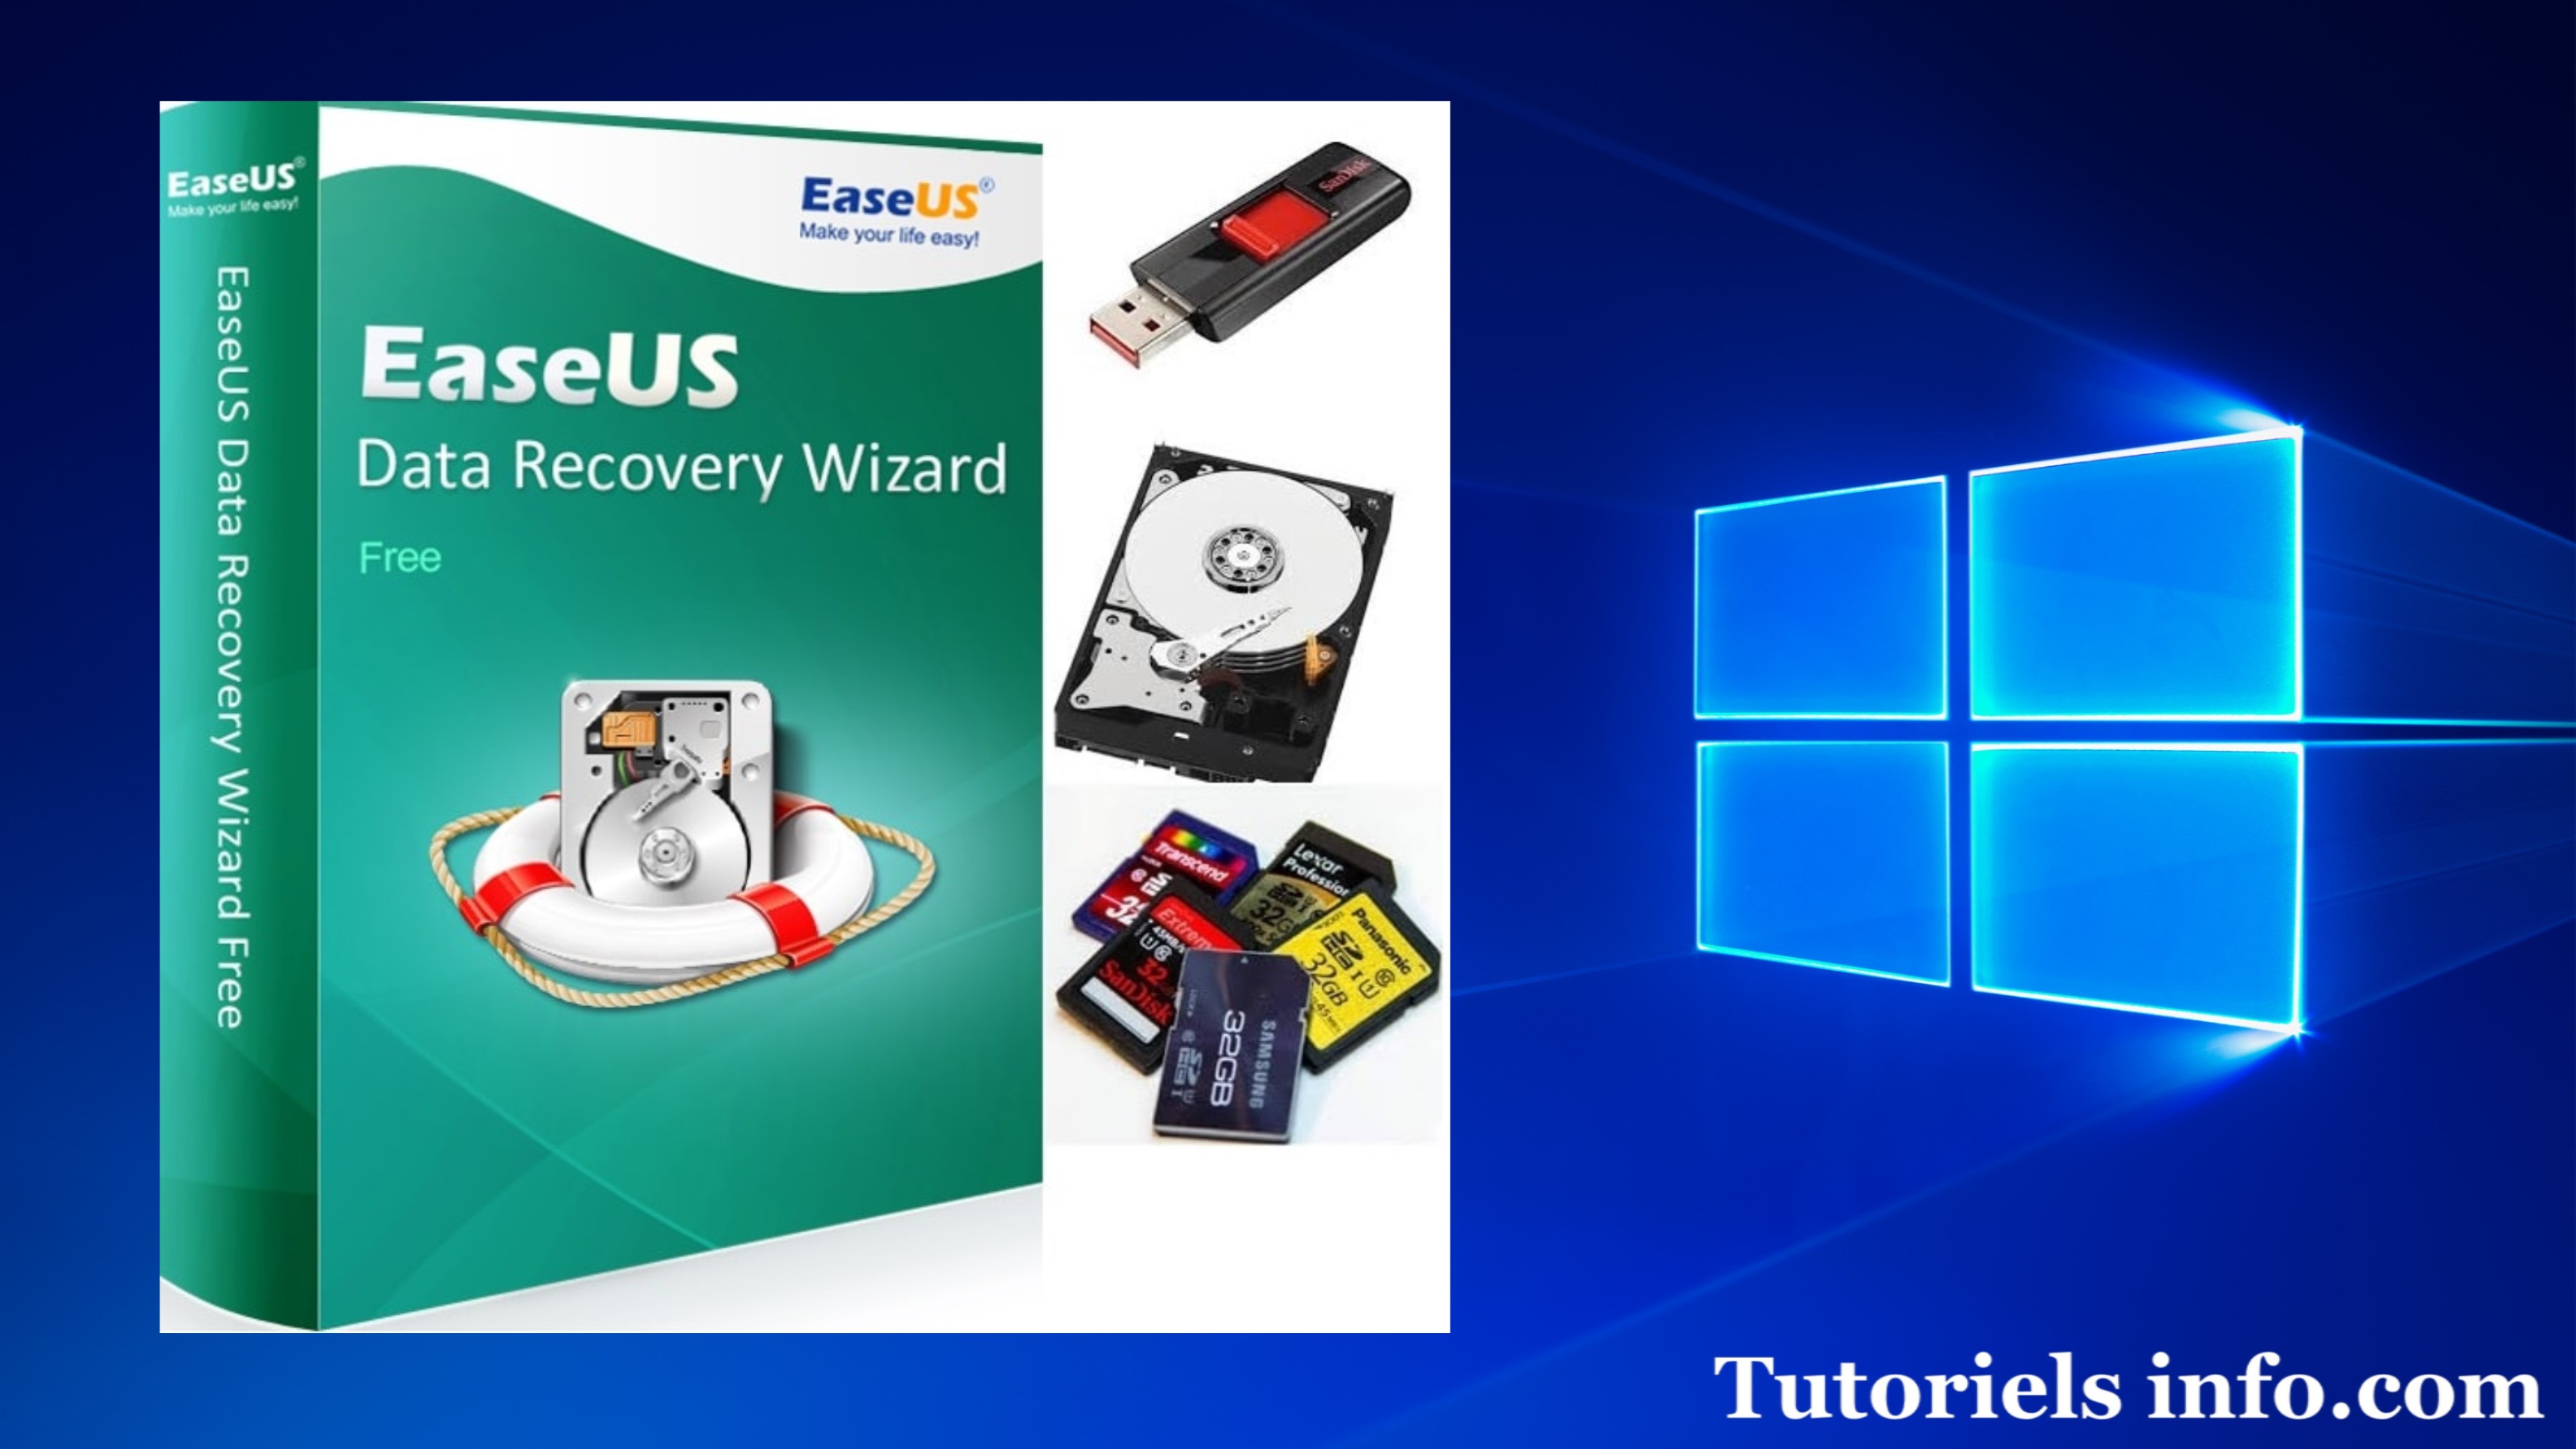 EASUS DATA RECOVERY FREE